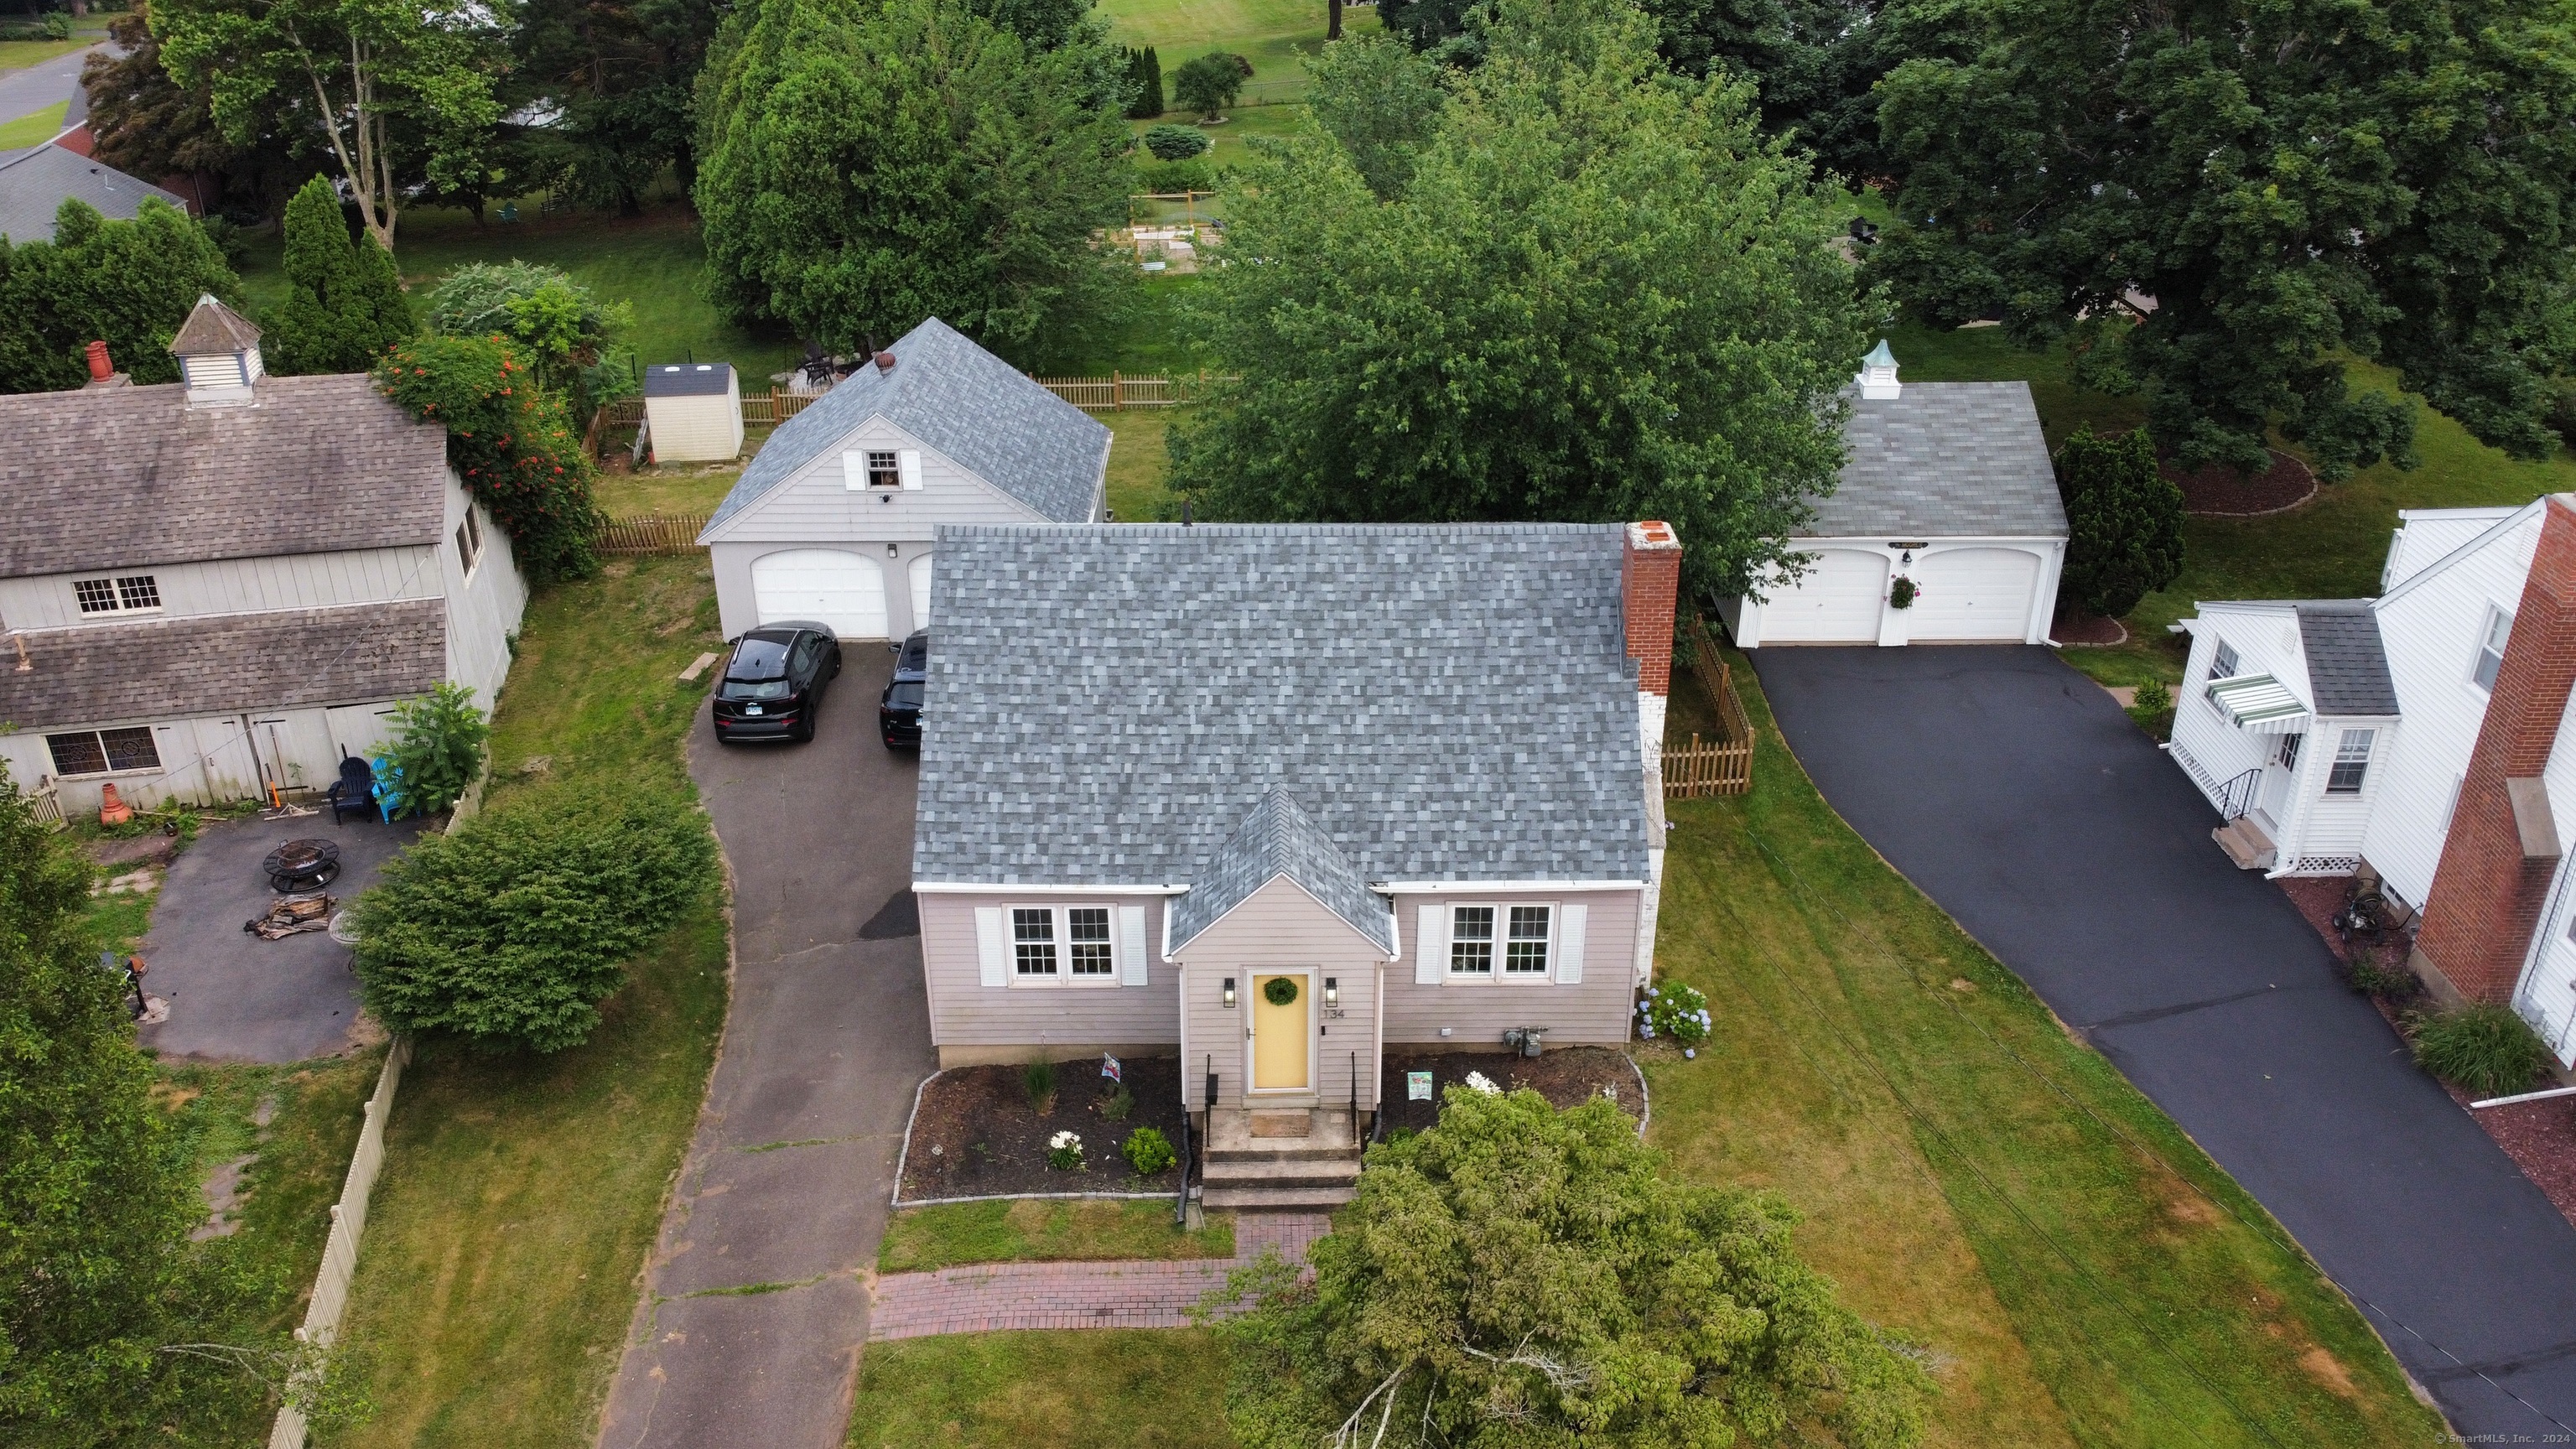 Property for Sale at 134 Wells Road, Wethersfield, Connecticut - Bedrooms: 3 
Bathrooms: 2 
Rooms: 6  - $339,000